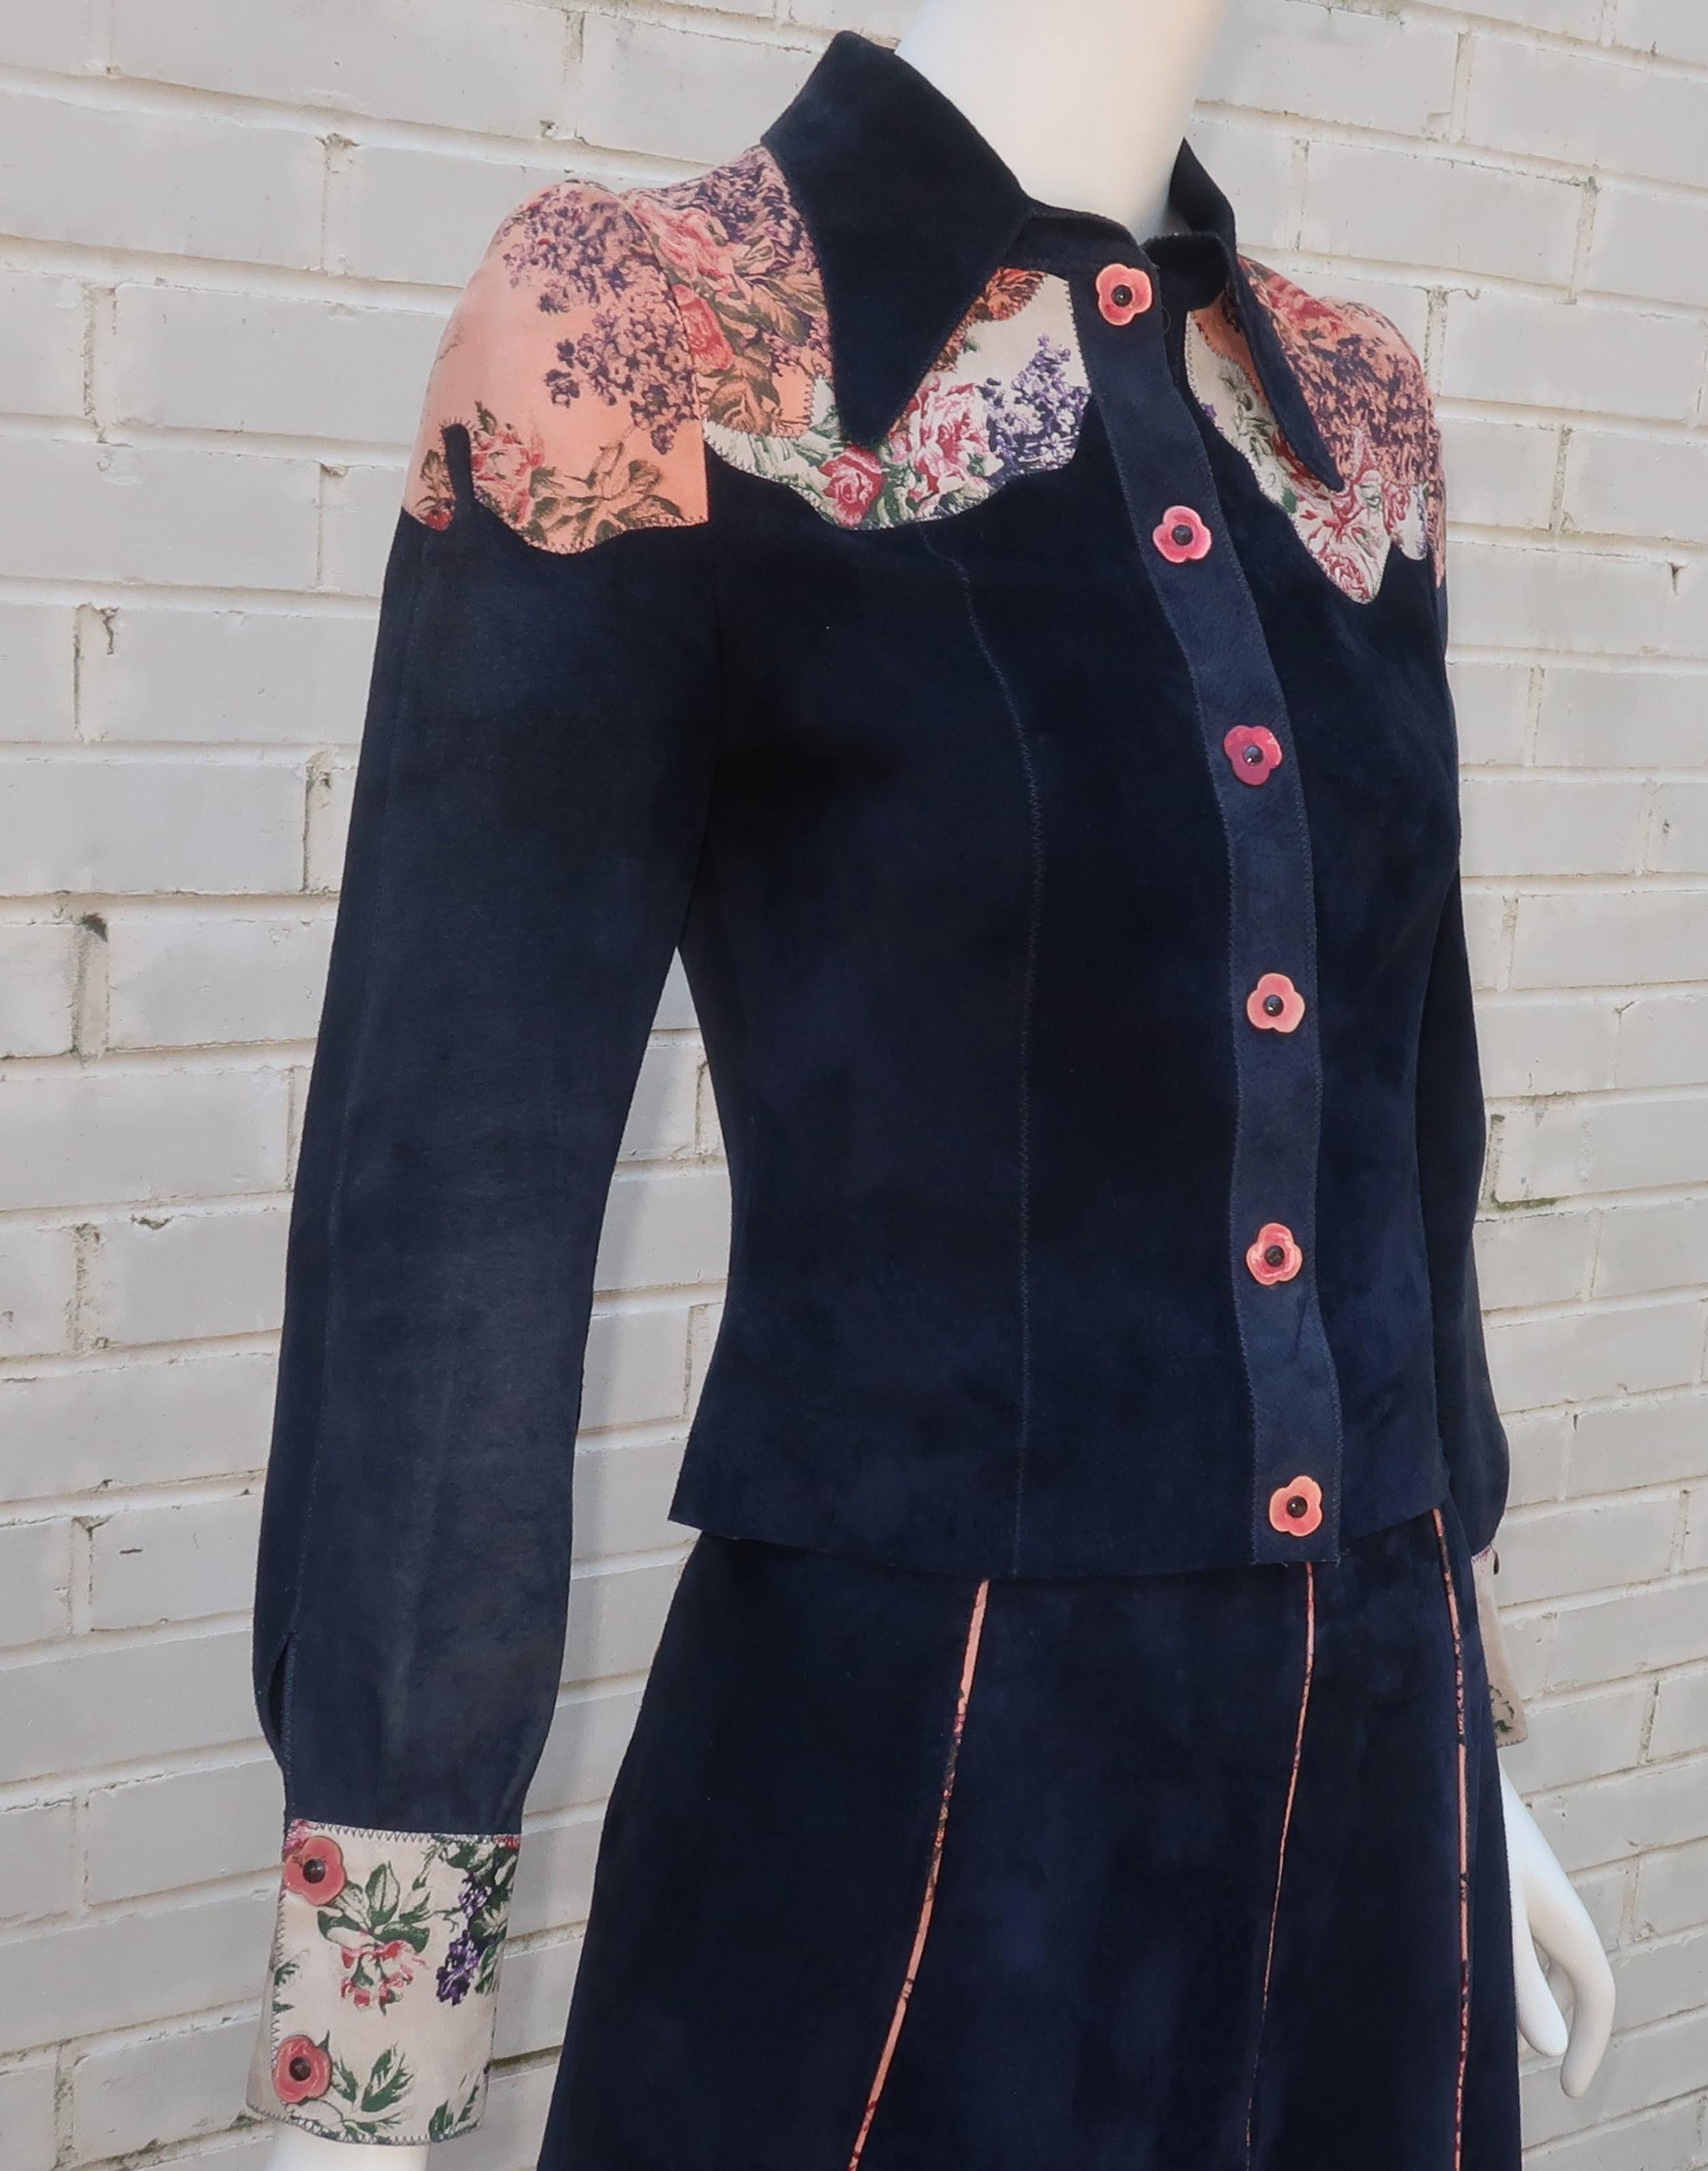 Roberto Cavalli Blue Suede Patchwork Printed Leather Jacket & Skirt, 1970's In Fair Condition For Sale In Atlanta, GA